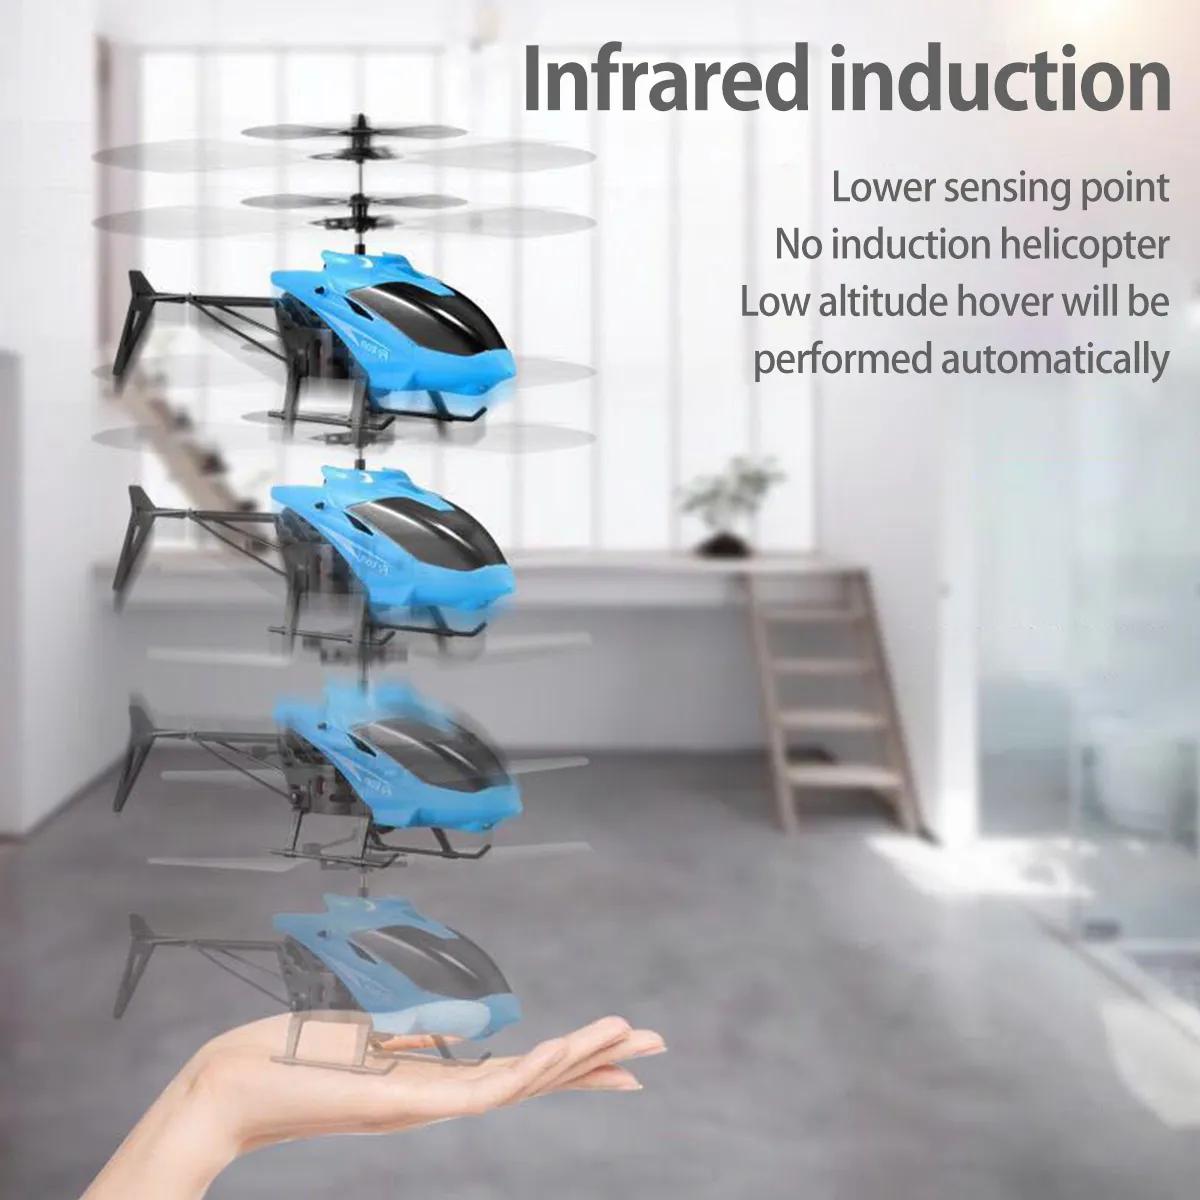 Rc Sensor Helicopter: Optimized Agility and Sensory Abilities.